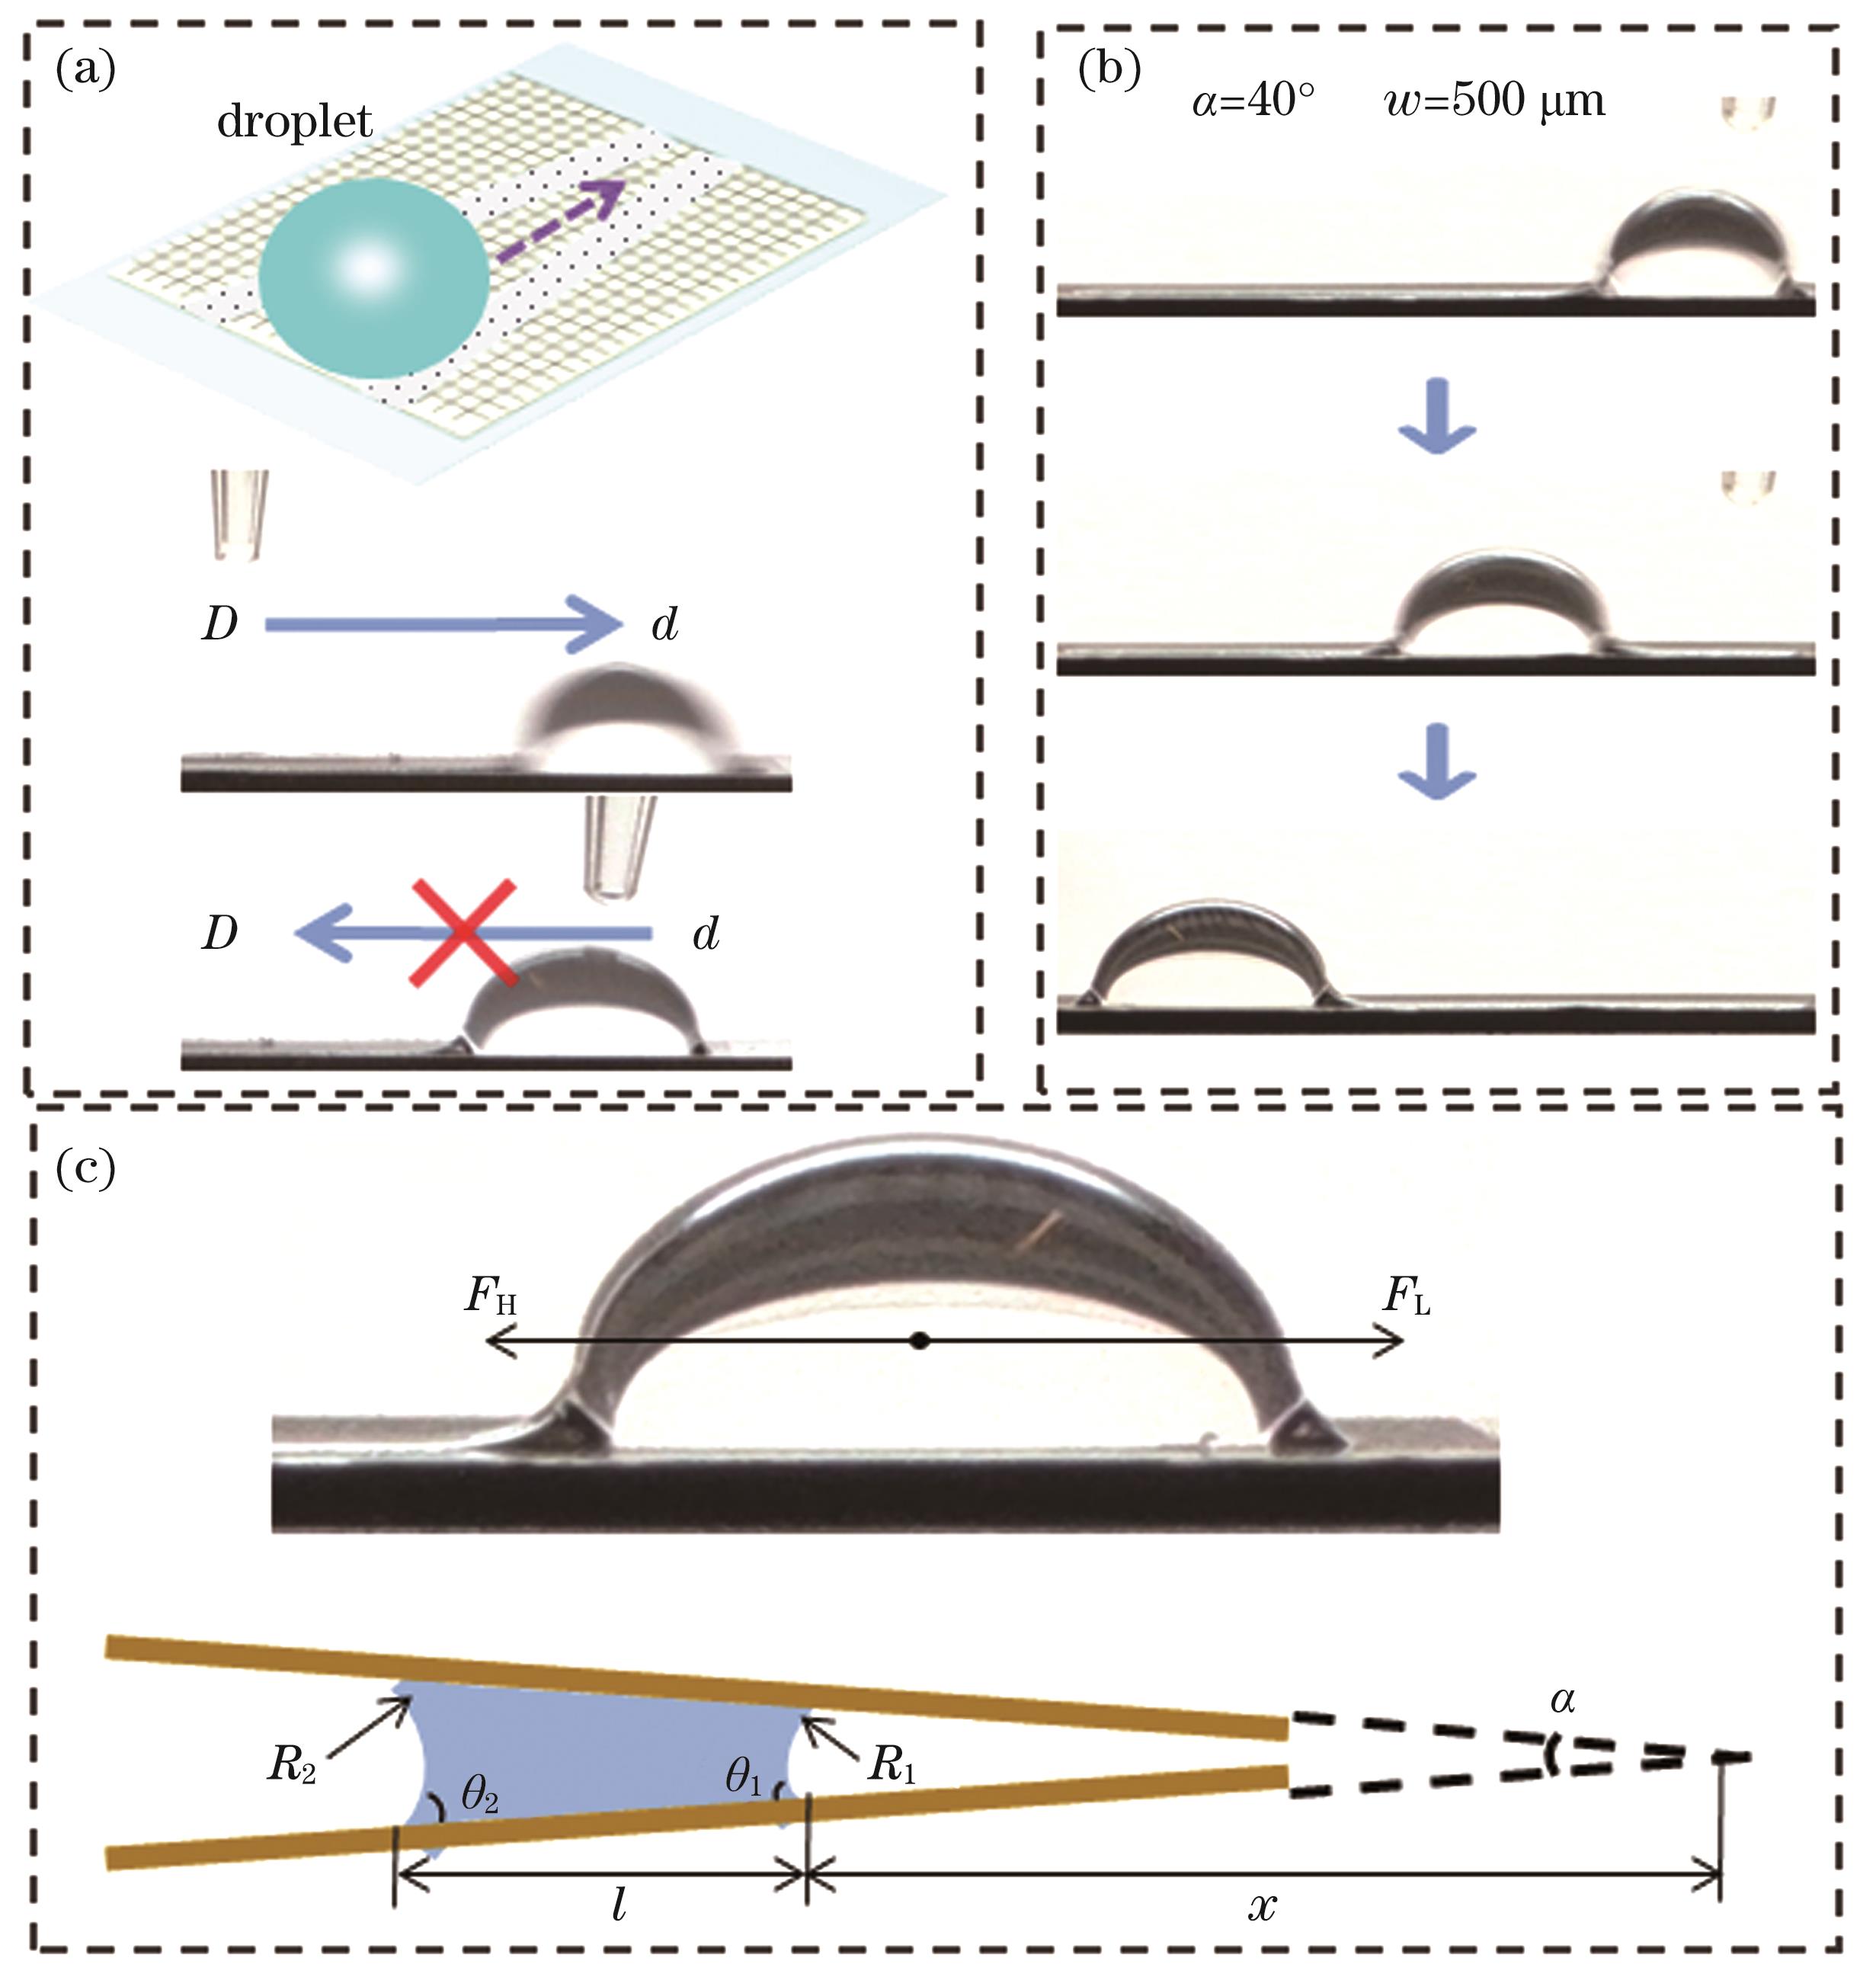 Droplet transport and its mechanism explanation. (a) Schematic of droplet transport; (b) sequential images of transport process; (c) mechanical analysis of spontaneous transport